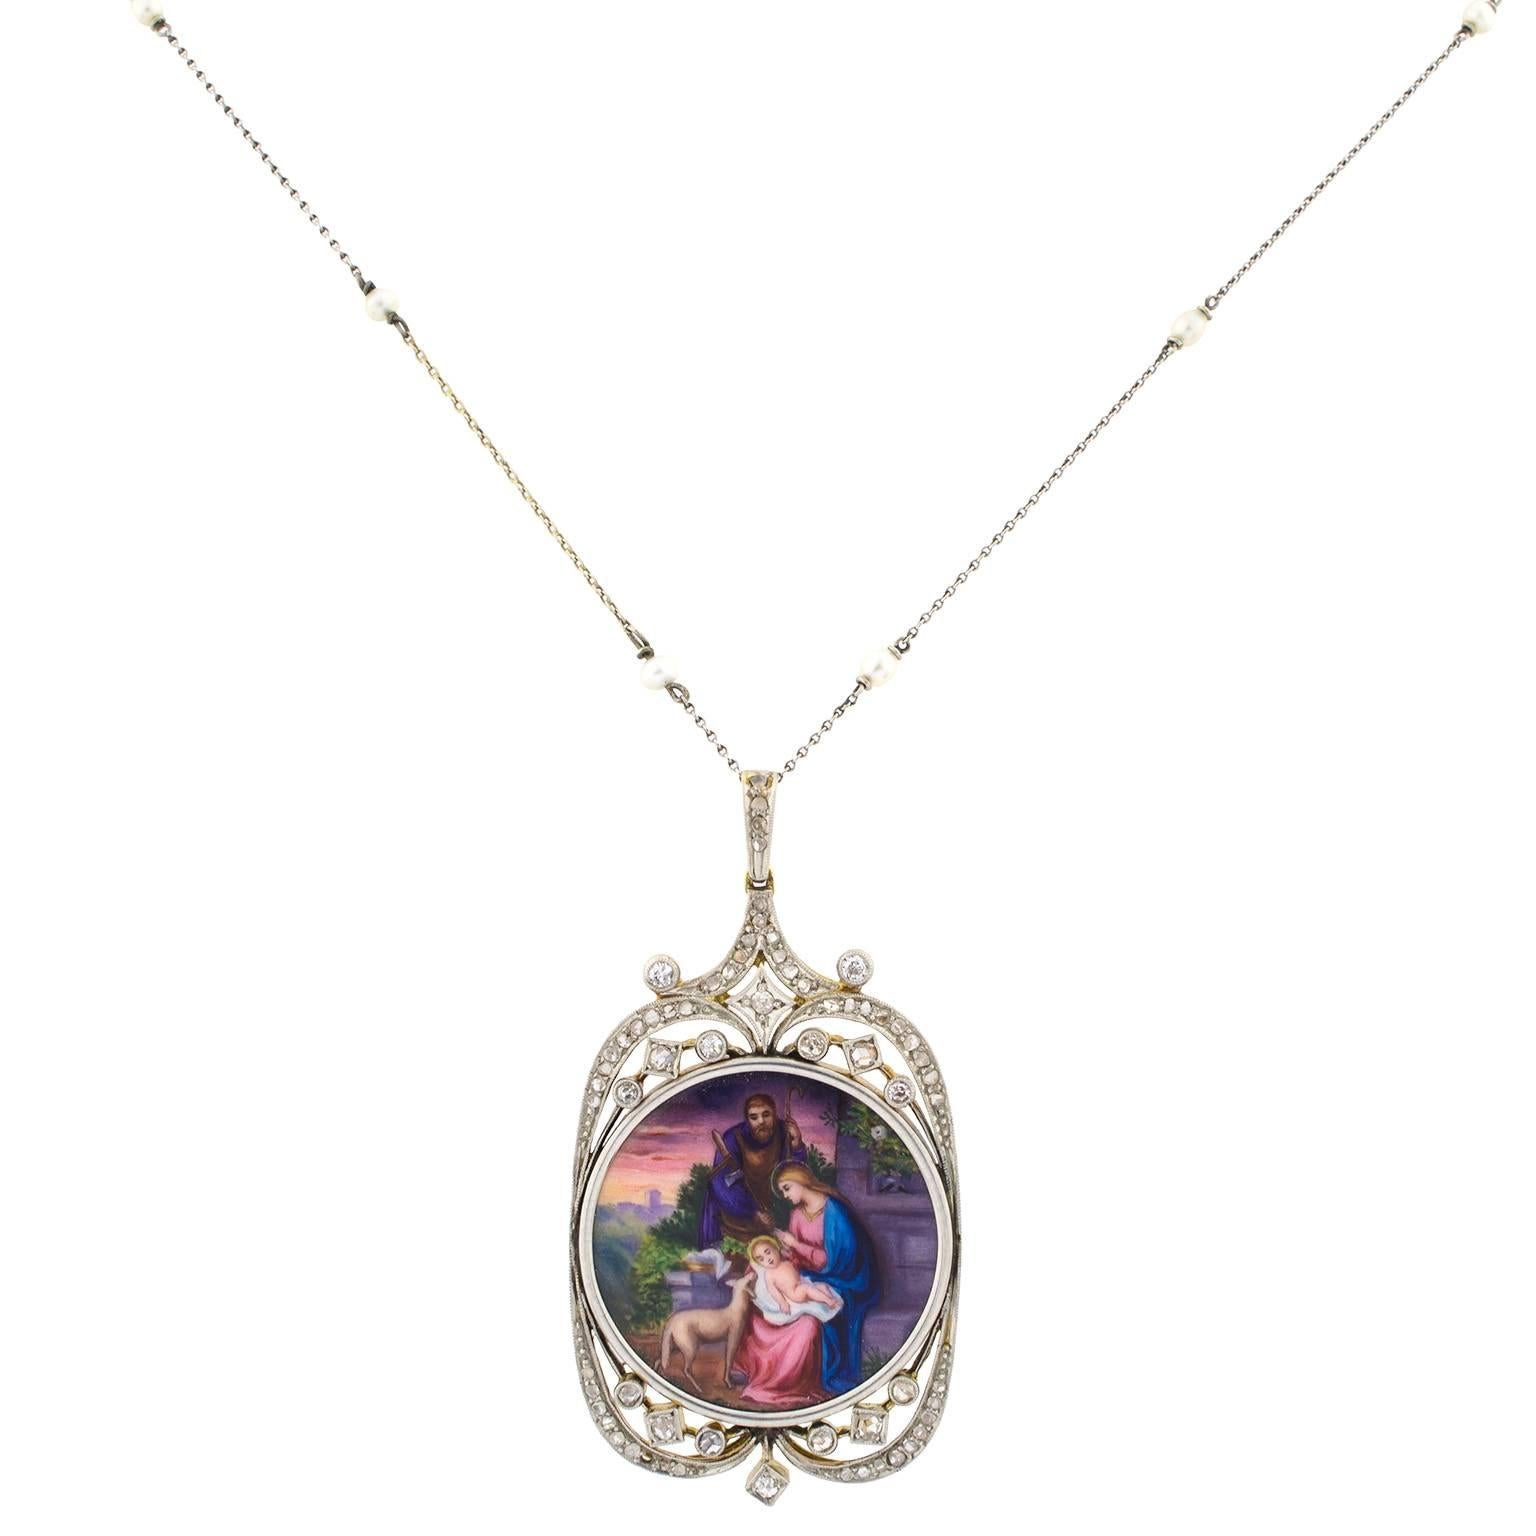 Early 20th century platinum-topped gold pendant representing the nativity in enamel decorated with diamonds. It comes with a platinum and pearls chain from the same period.